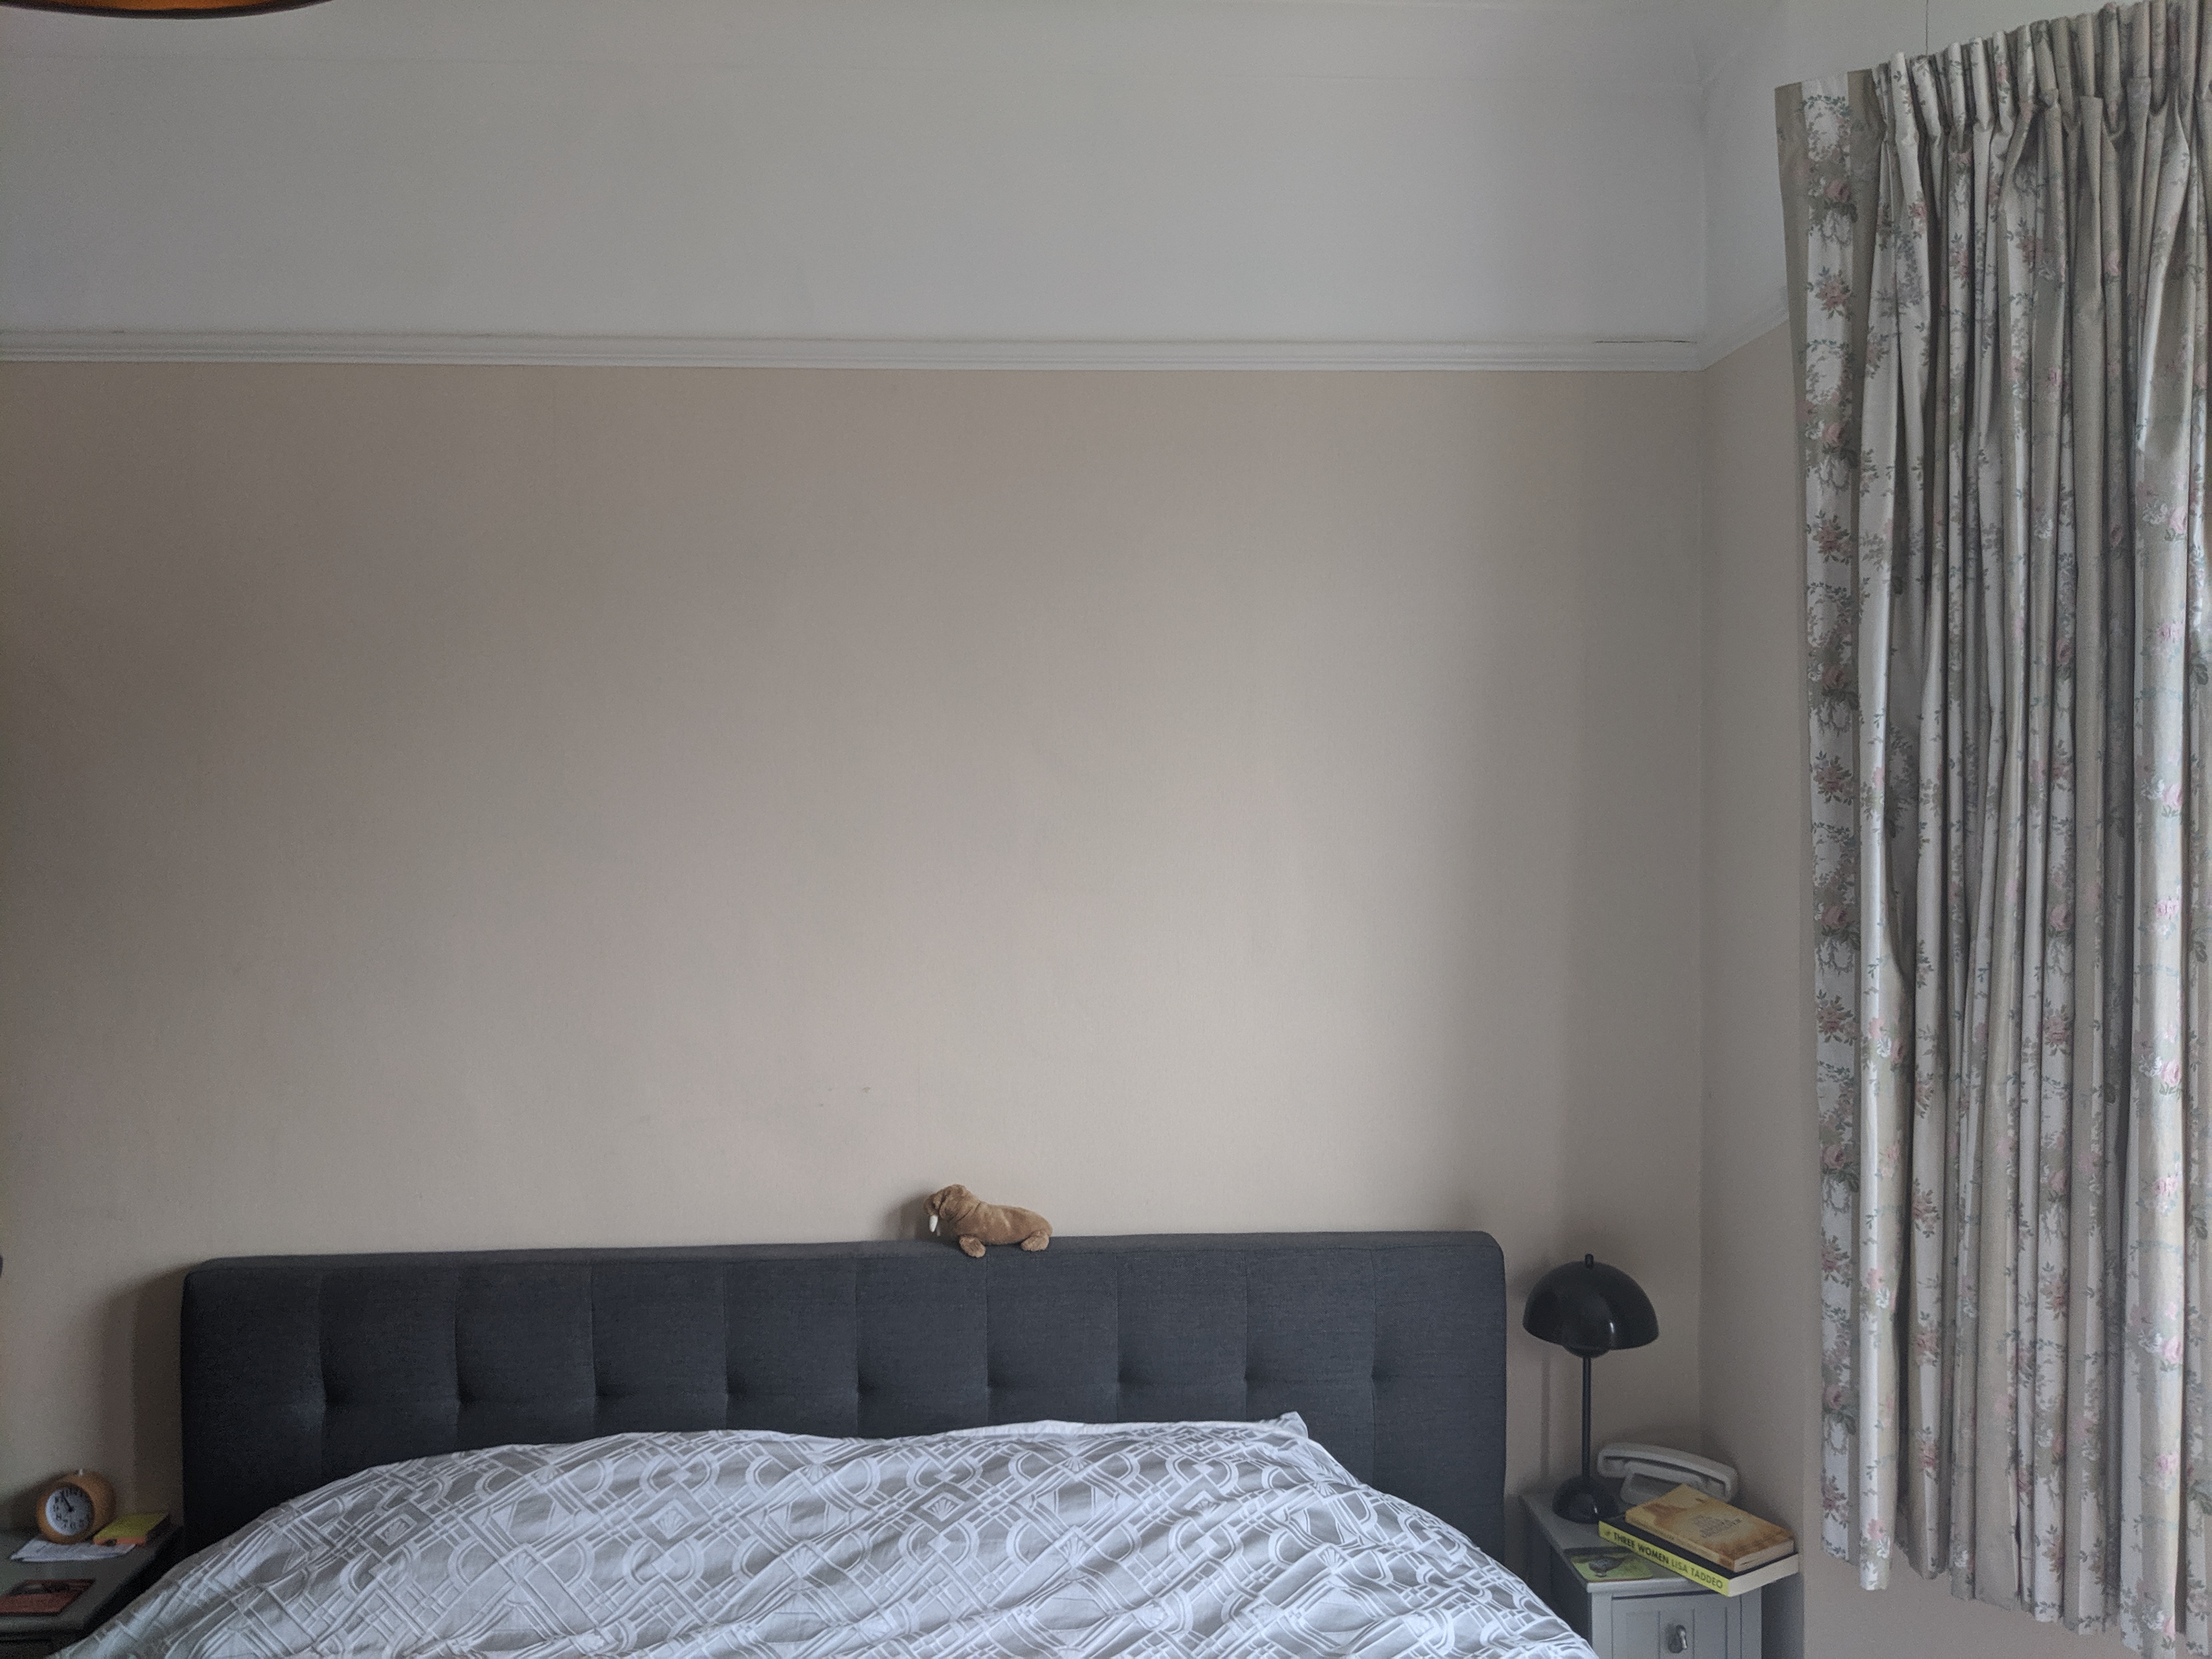 A photo of the room before, showing the bed  against a plain wall.